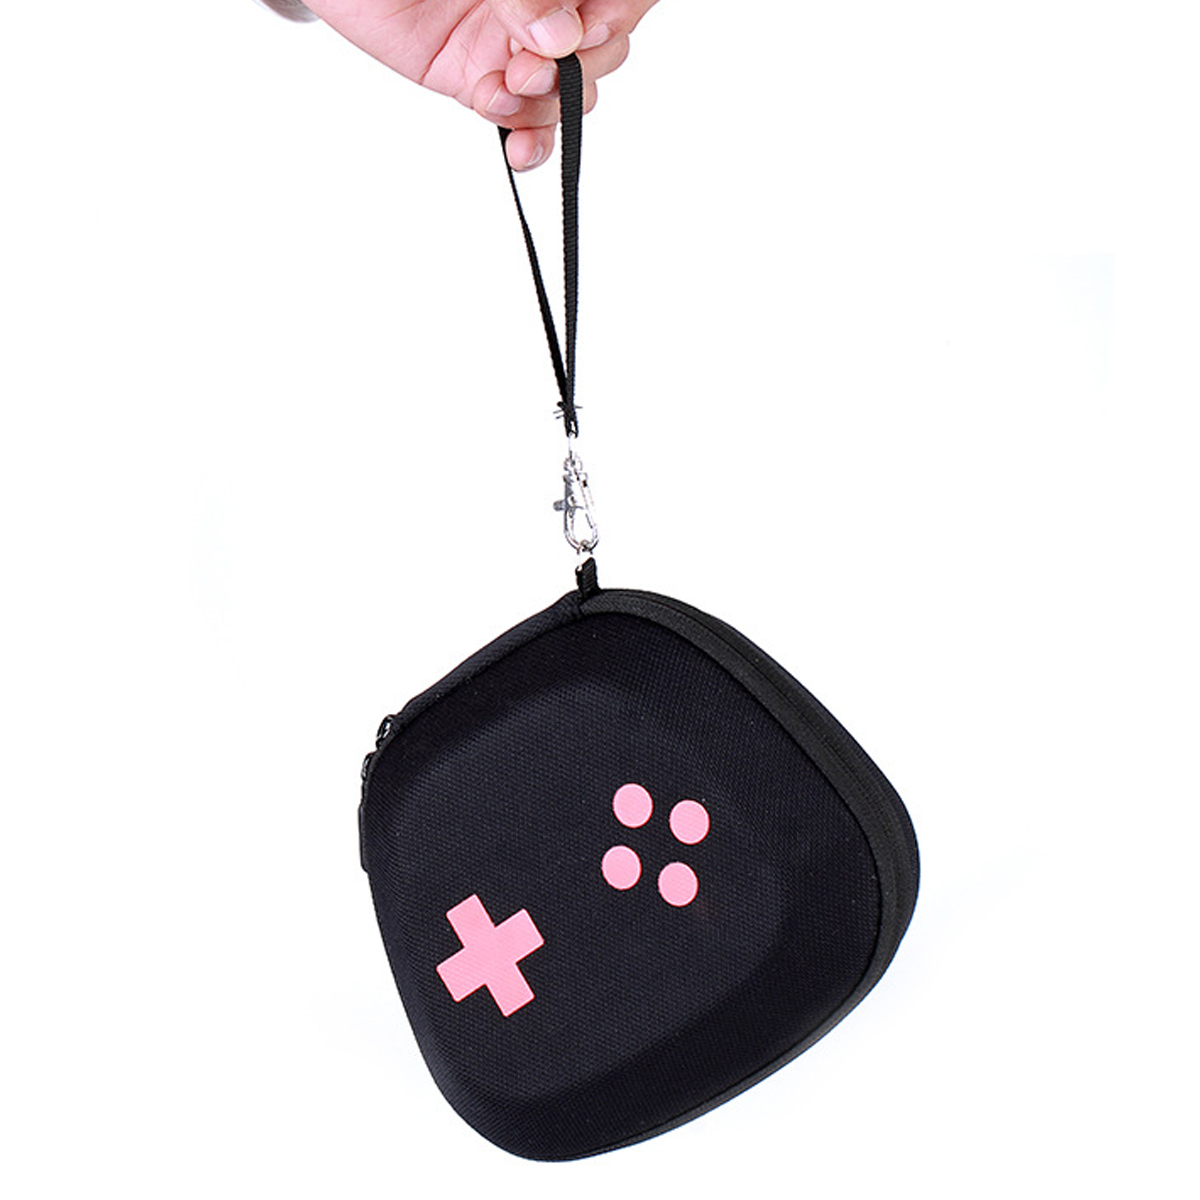 Universal-Black-Portable-Game-Console-Handle-Storage-Bag-Protective-Bags-for-Gamepad-1378387-2